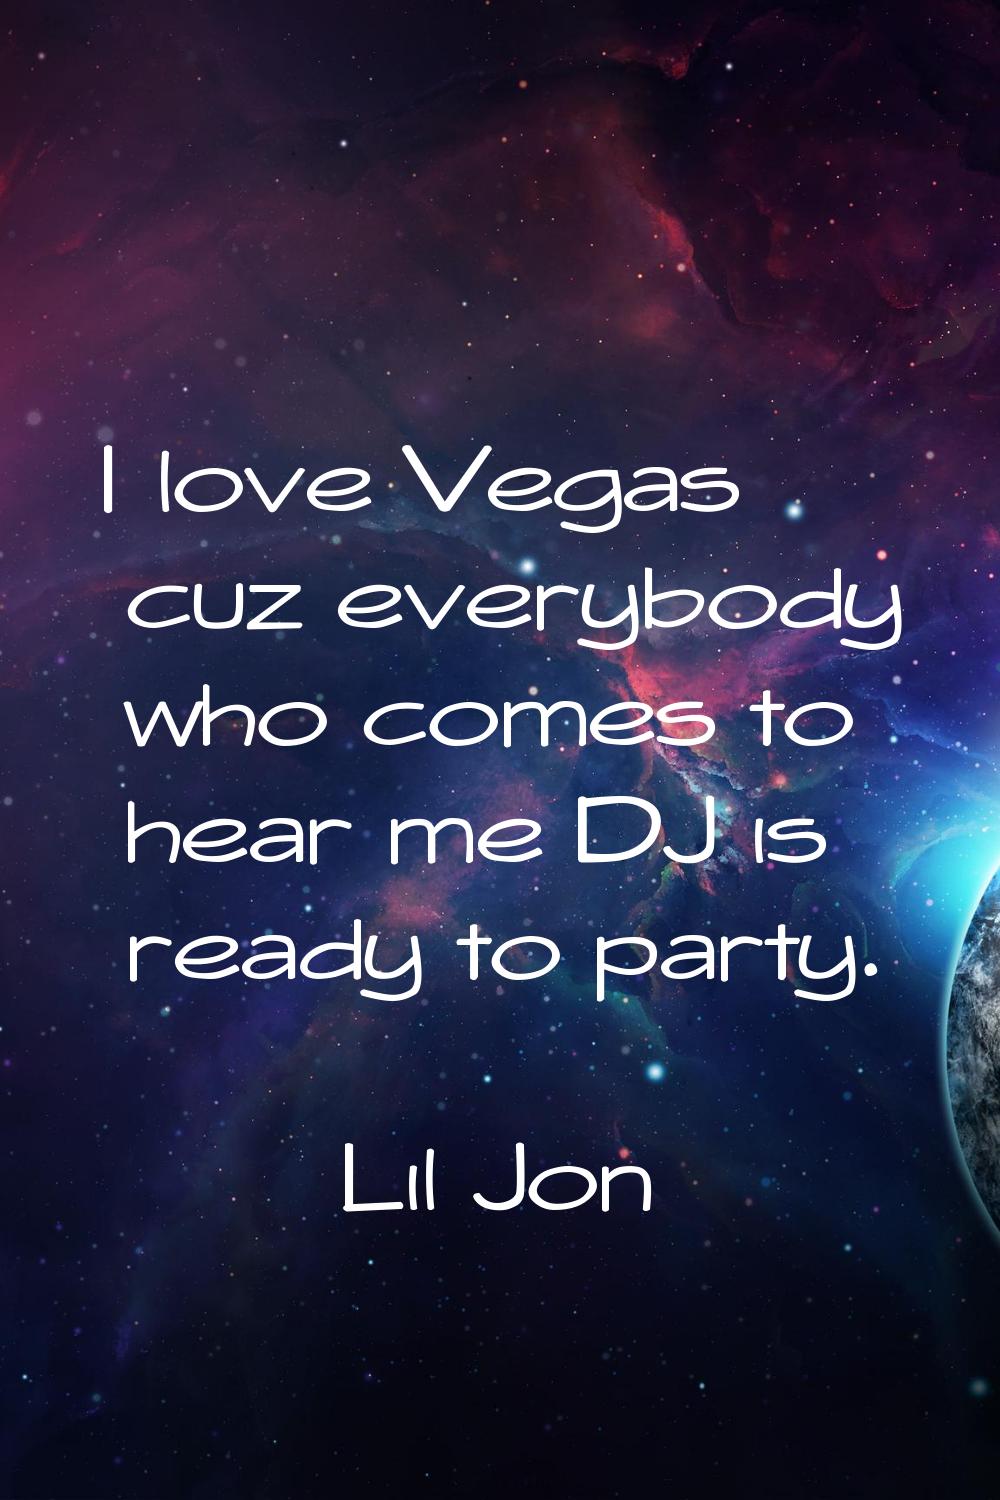 I love Vegas cuz everybody who comes to hear me DJ is ready to party.